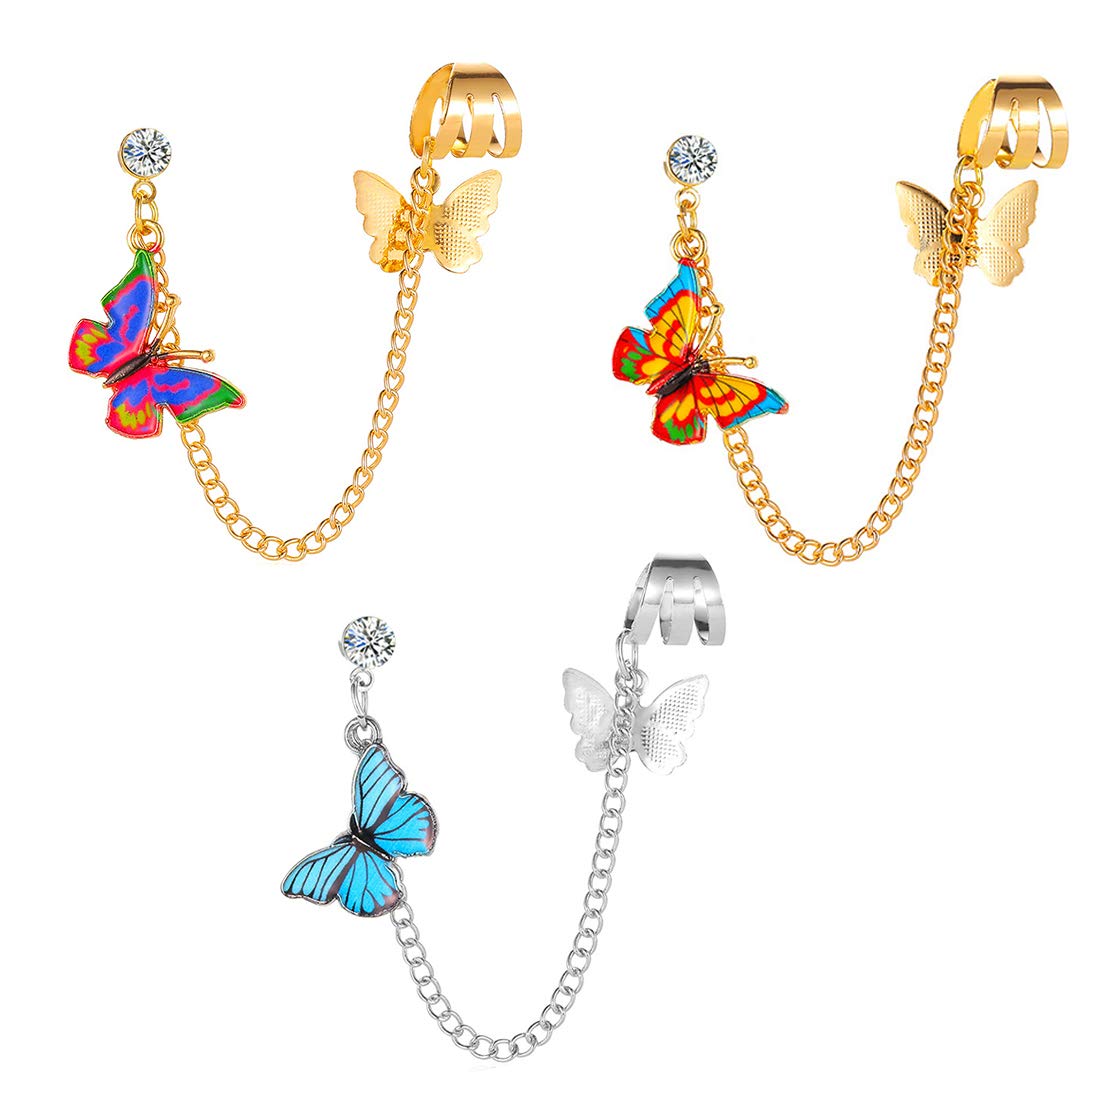 Yellow Chimes Ear Cuffs for Women Combo of 3 PCs Multicolour Ear Cuff Earrings with Butterfly Charm Hanging Single Piece Drop Earrings for Women and Girls,